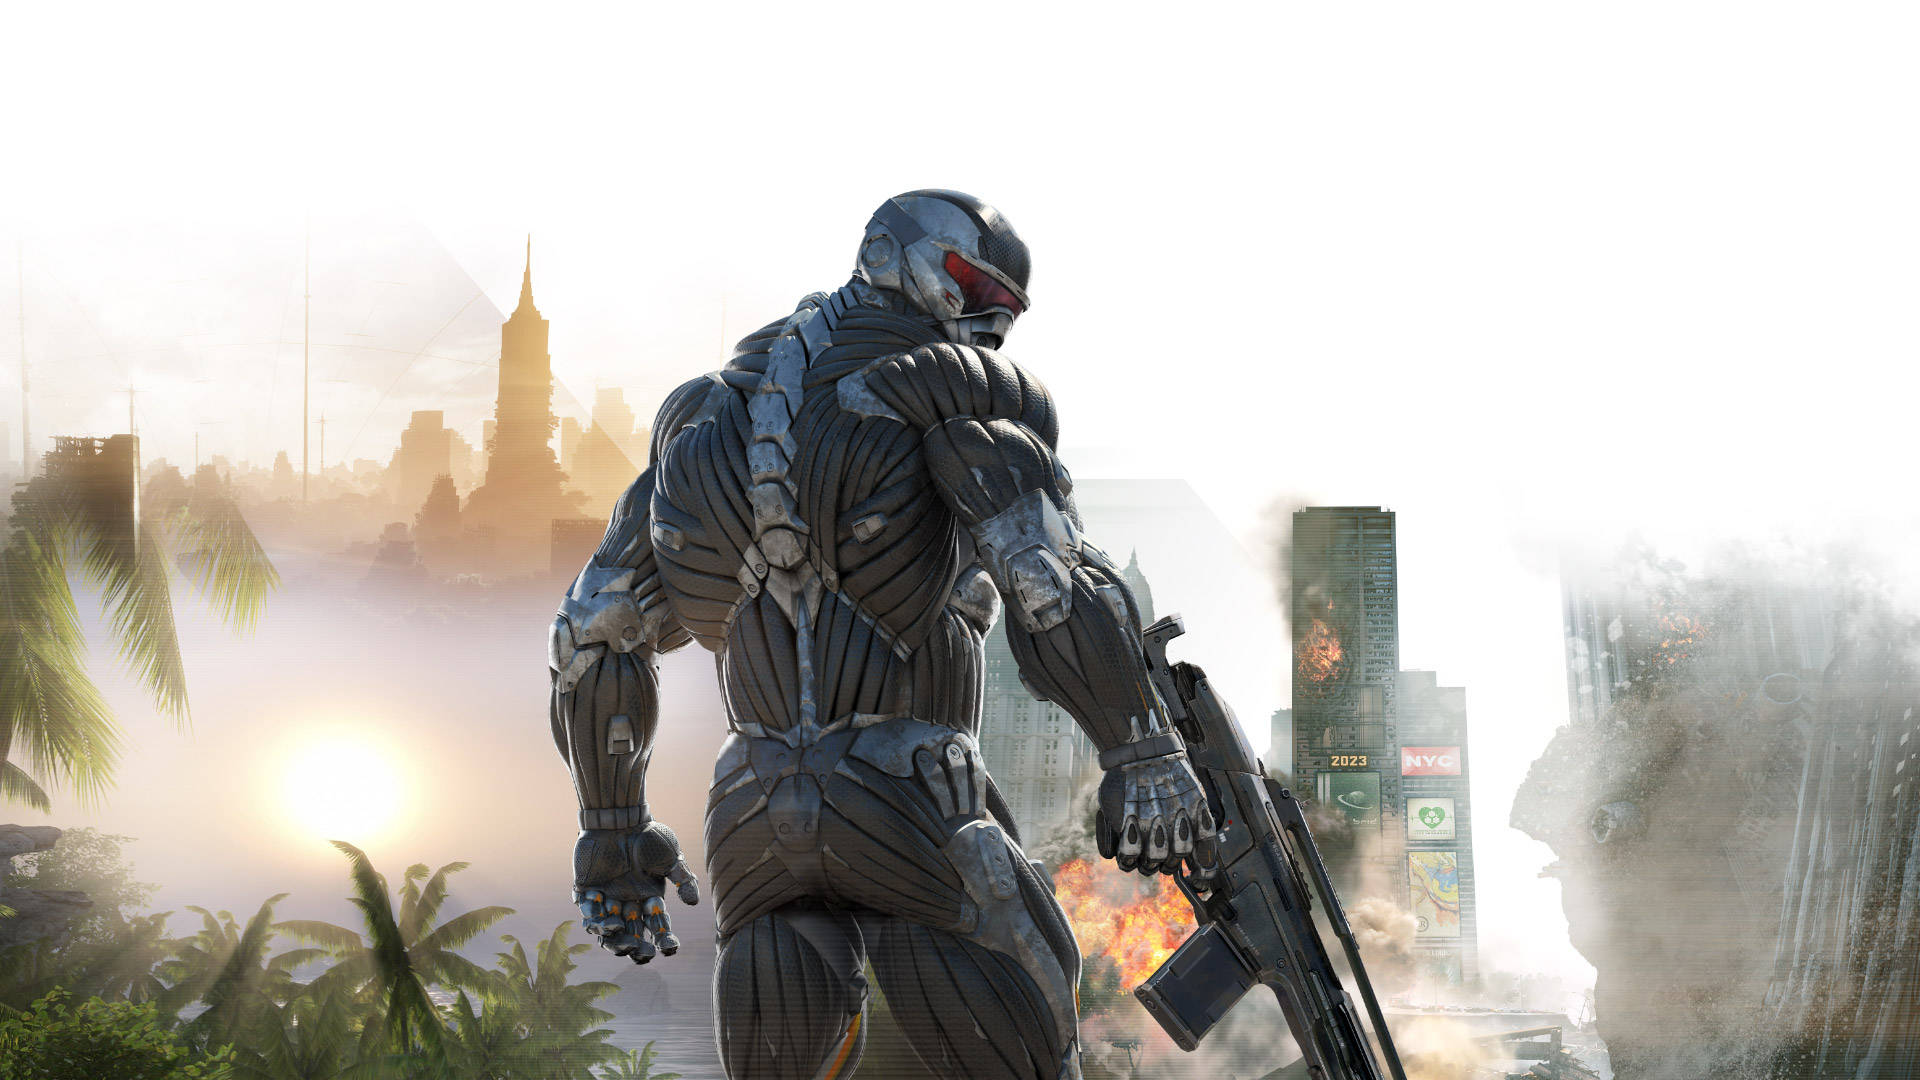 Image  Feel the full power of Crysis Remastered Wallpaper